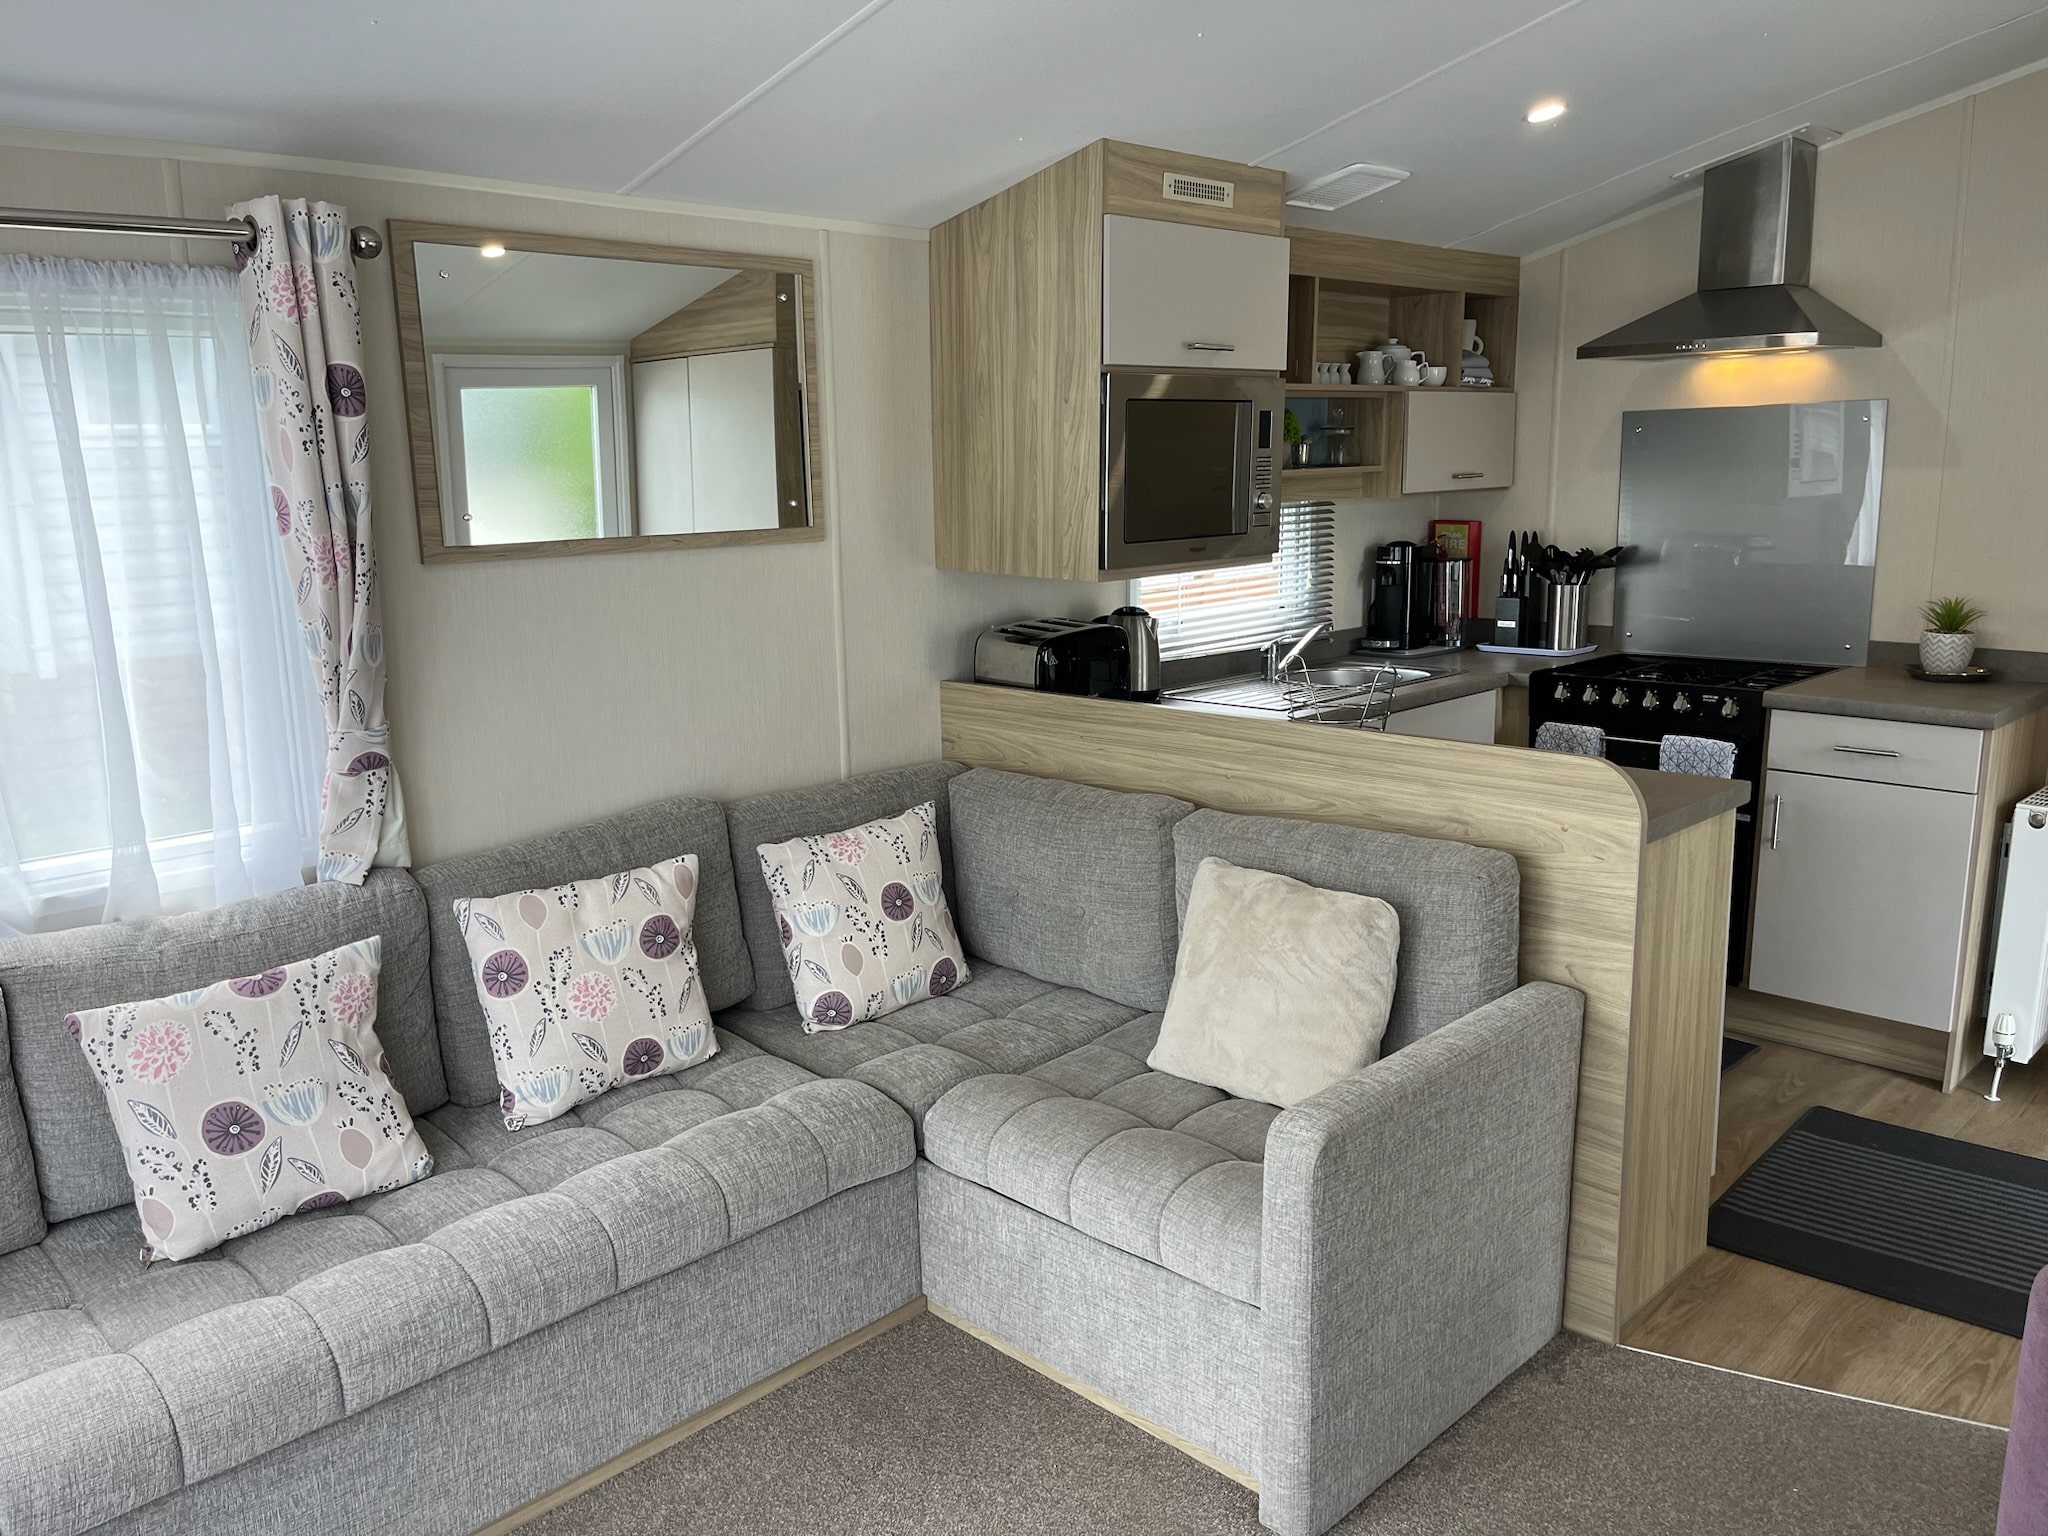 2019 Willerby Linwood for sale at Juliots Well Holiday park, Camelford, Cornwall